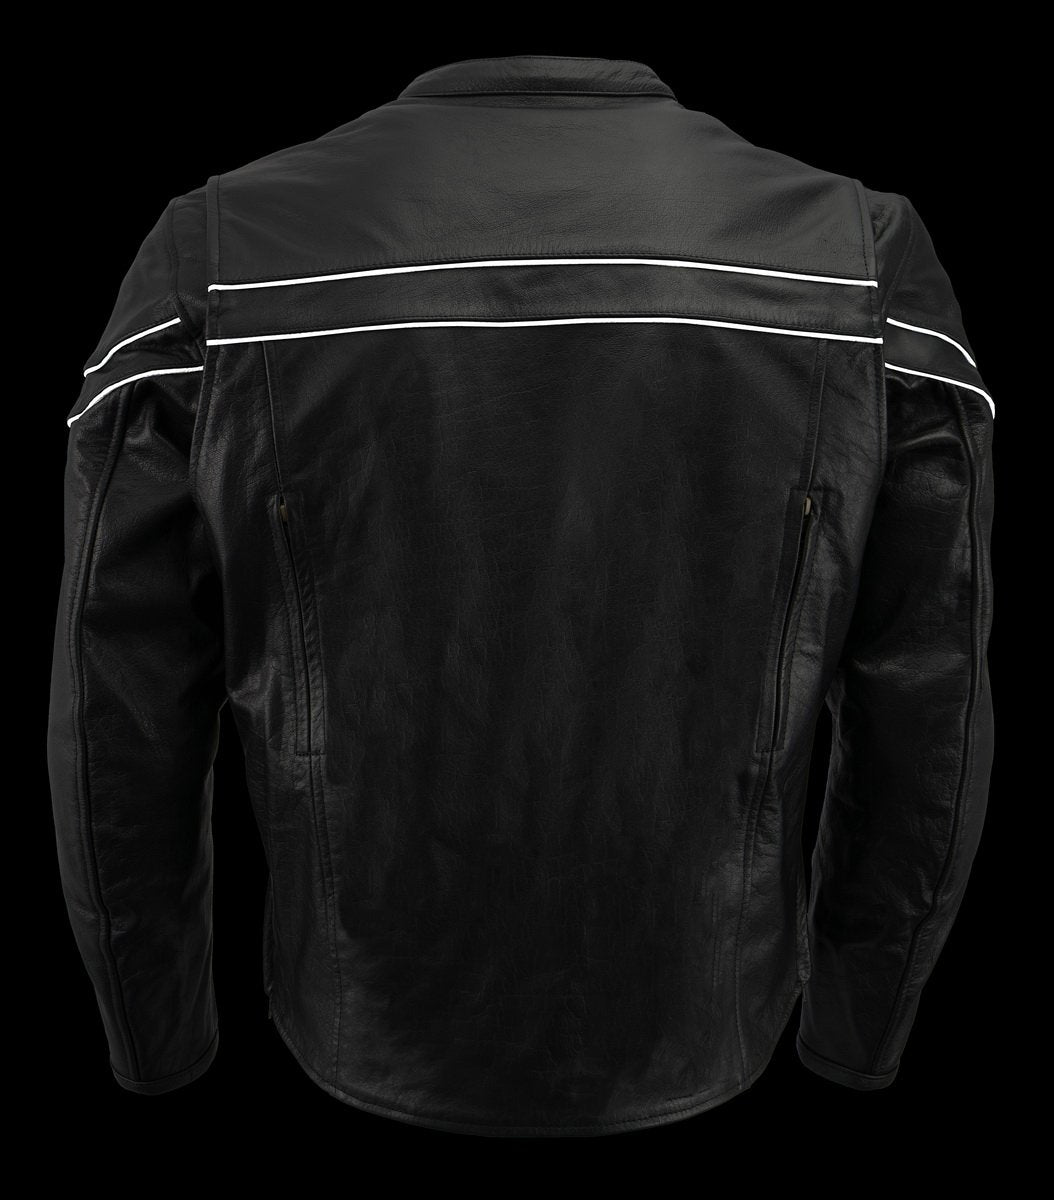 Men’s Premium Leather Crossover Vented Scooter Jacket with Removable CE Approved Armor BZ2525